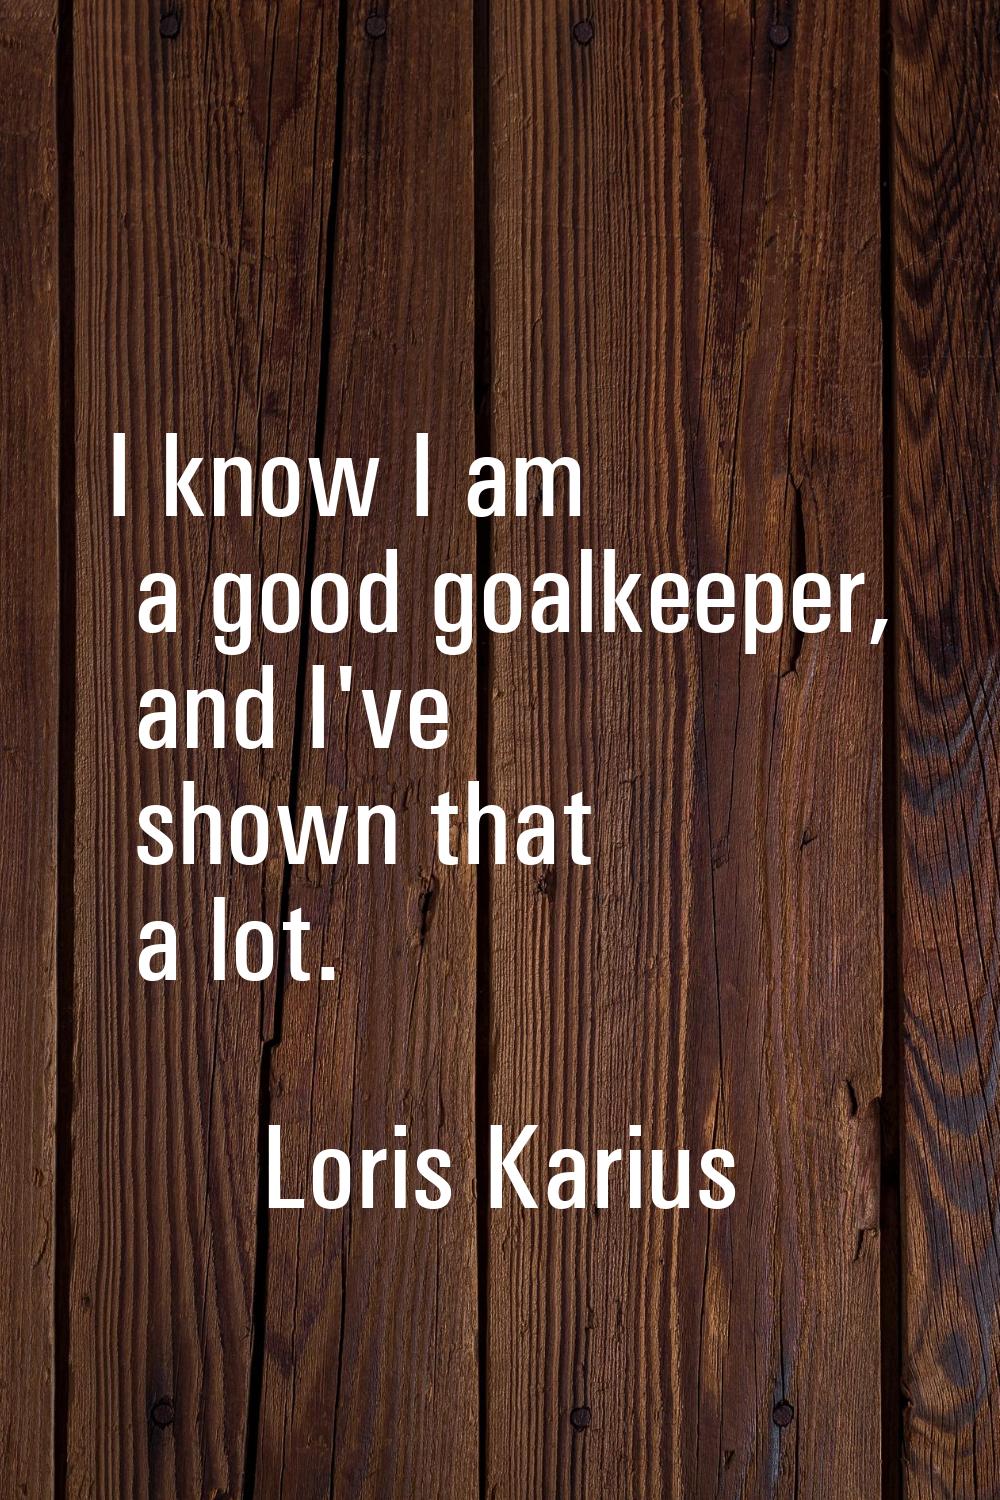 I know I am a good goalkeeper, and I've shown that a lot.